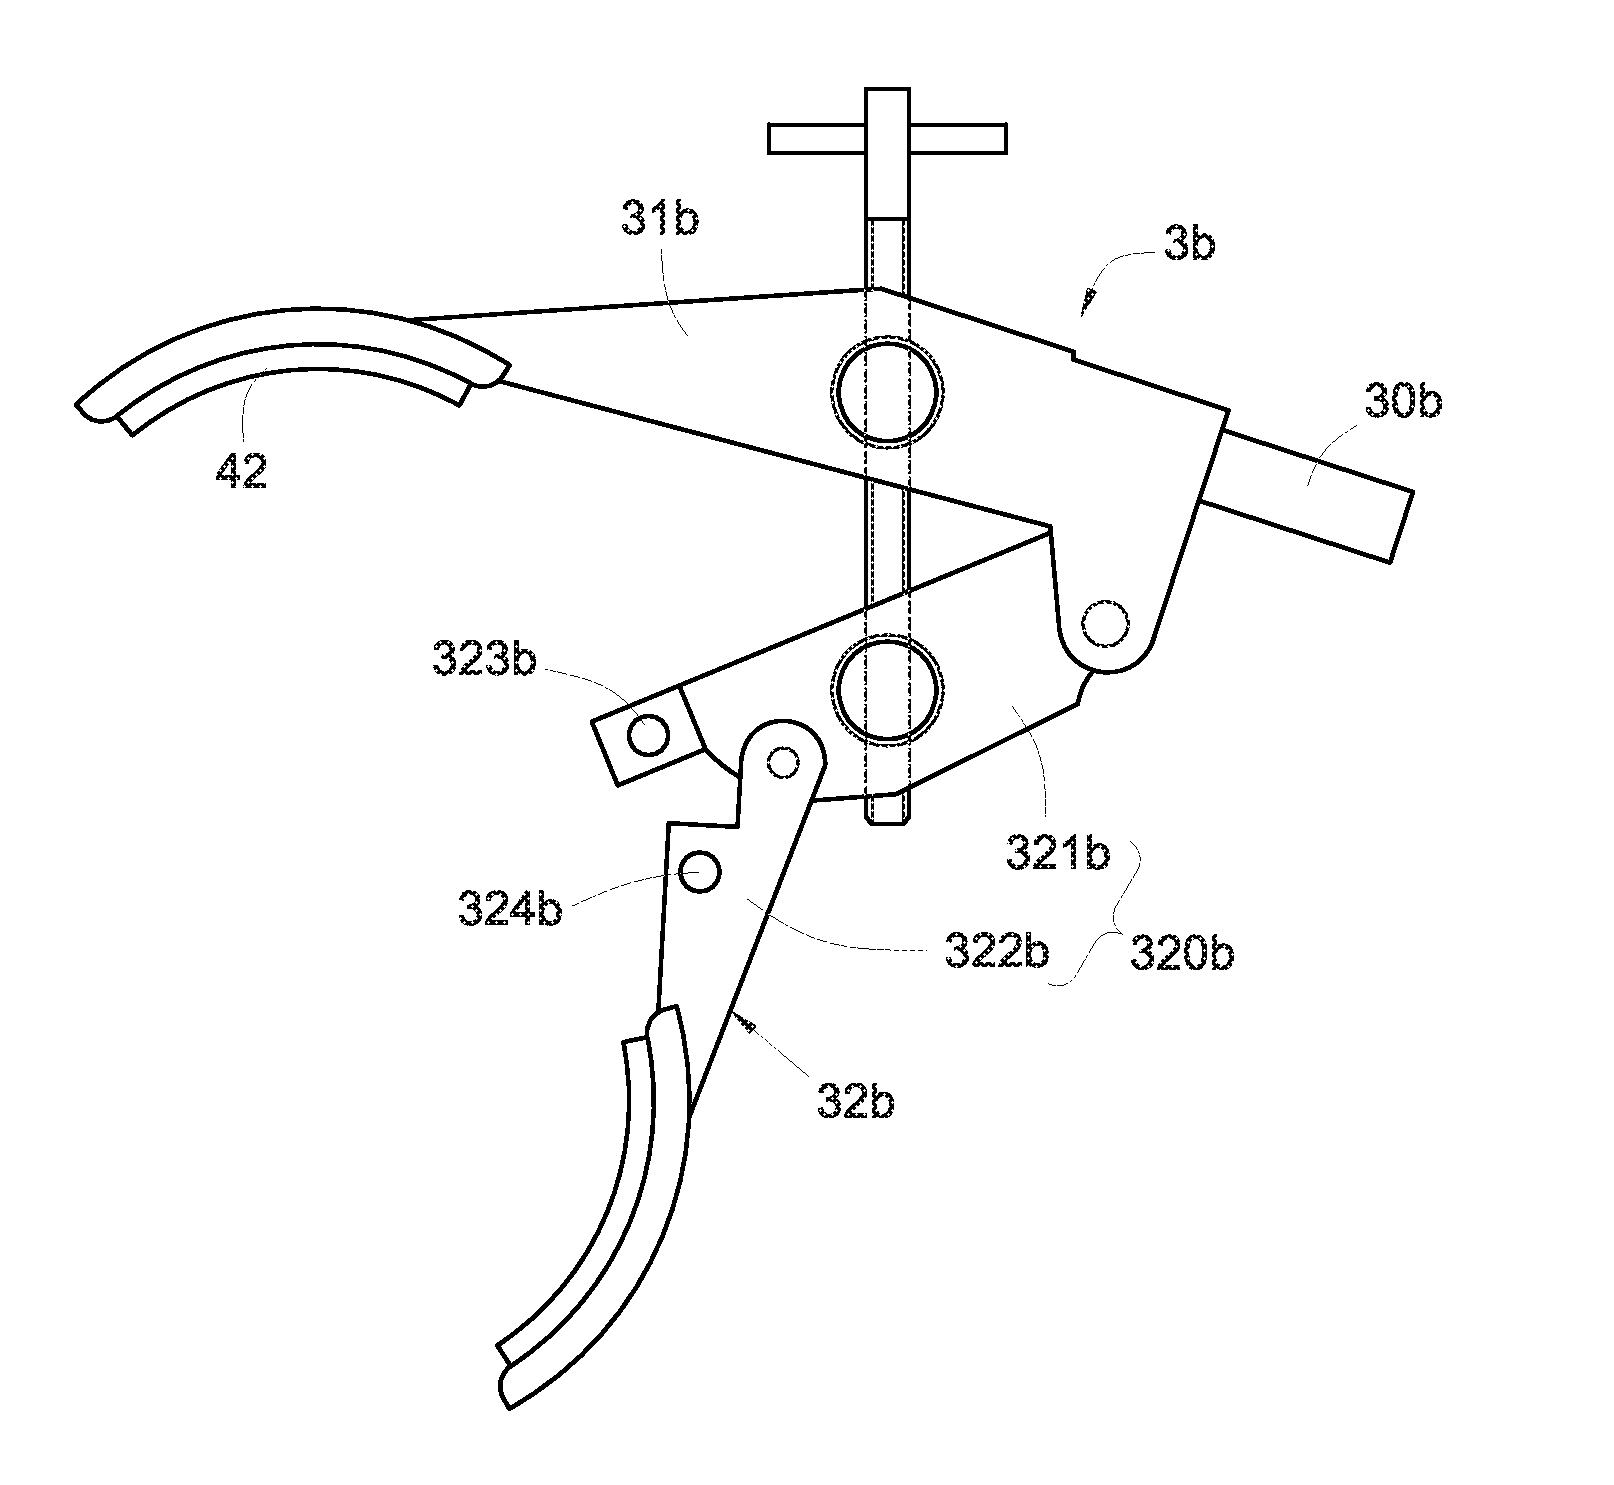 Positioning device working with fixer for handheld, portable, mobile device